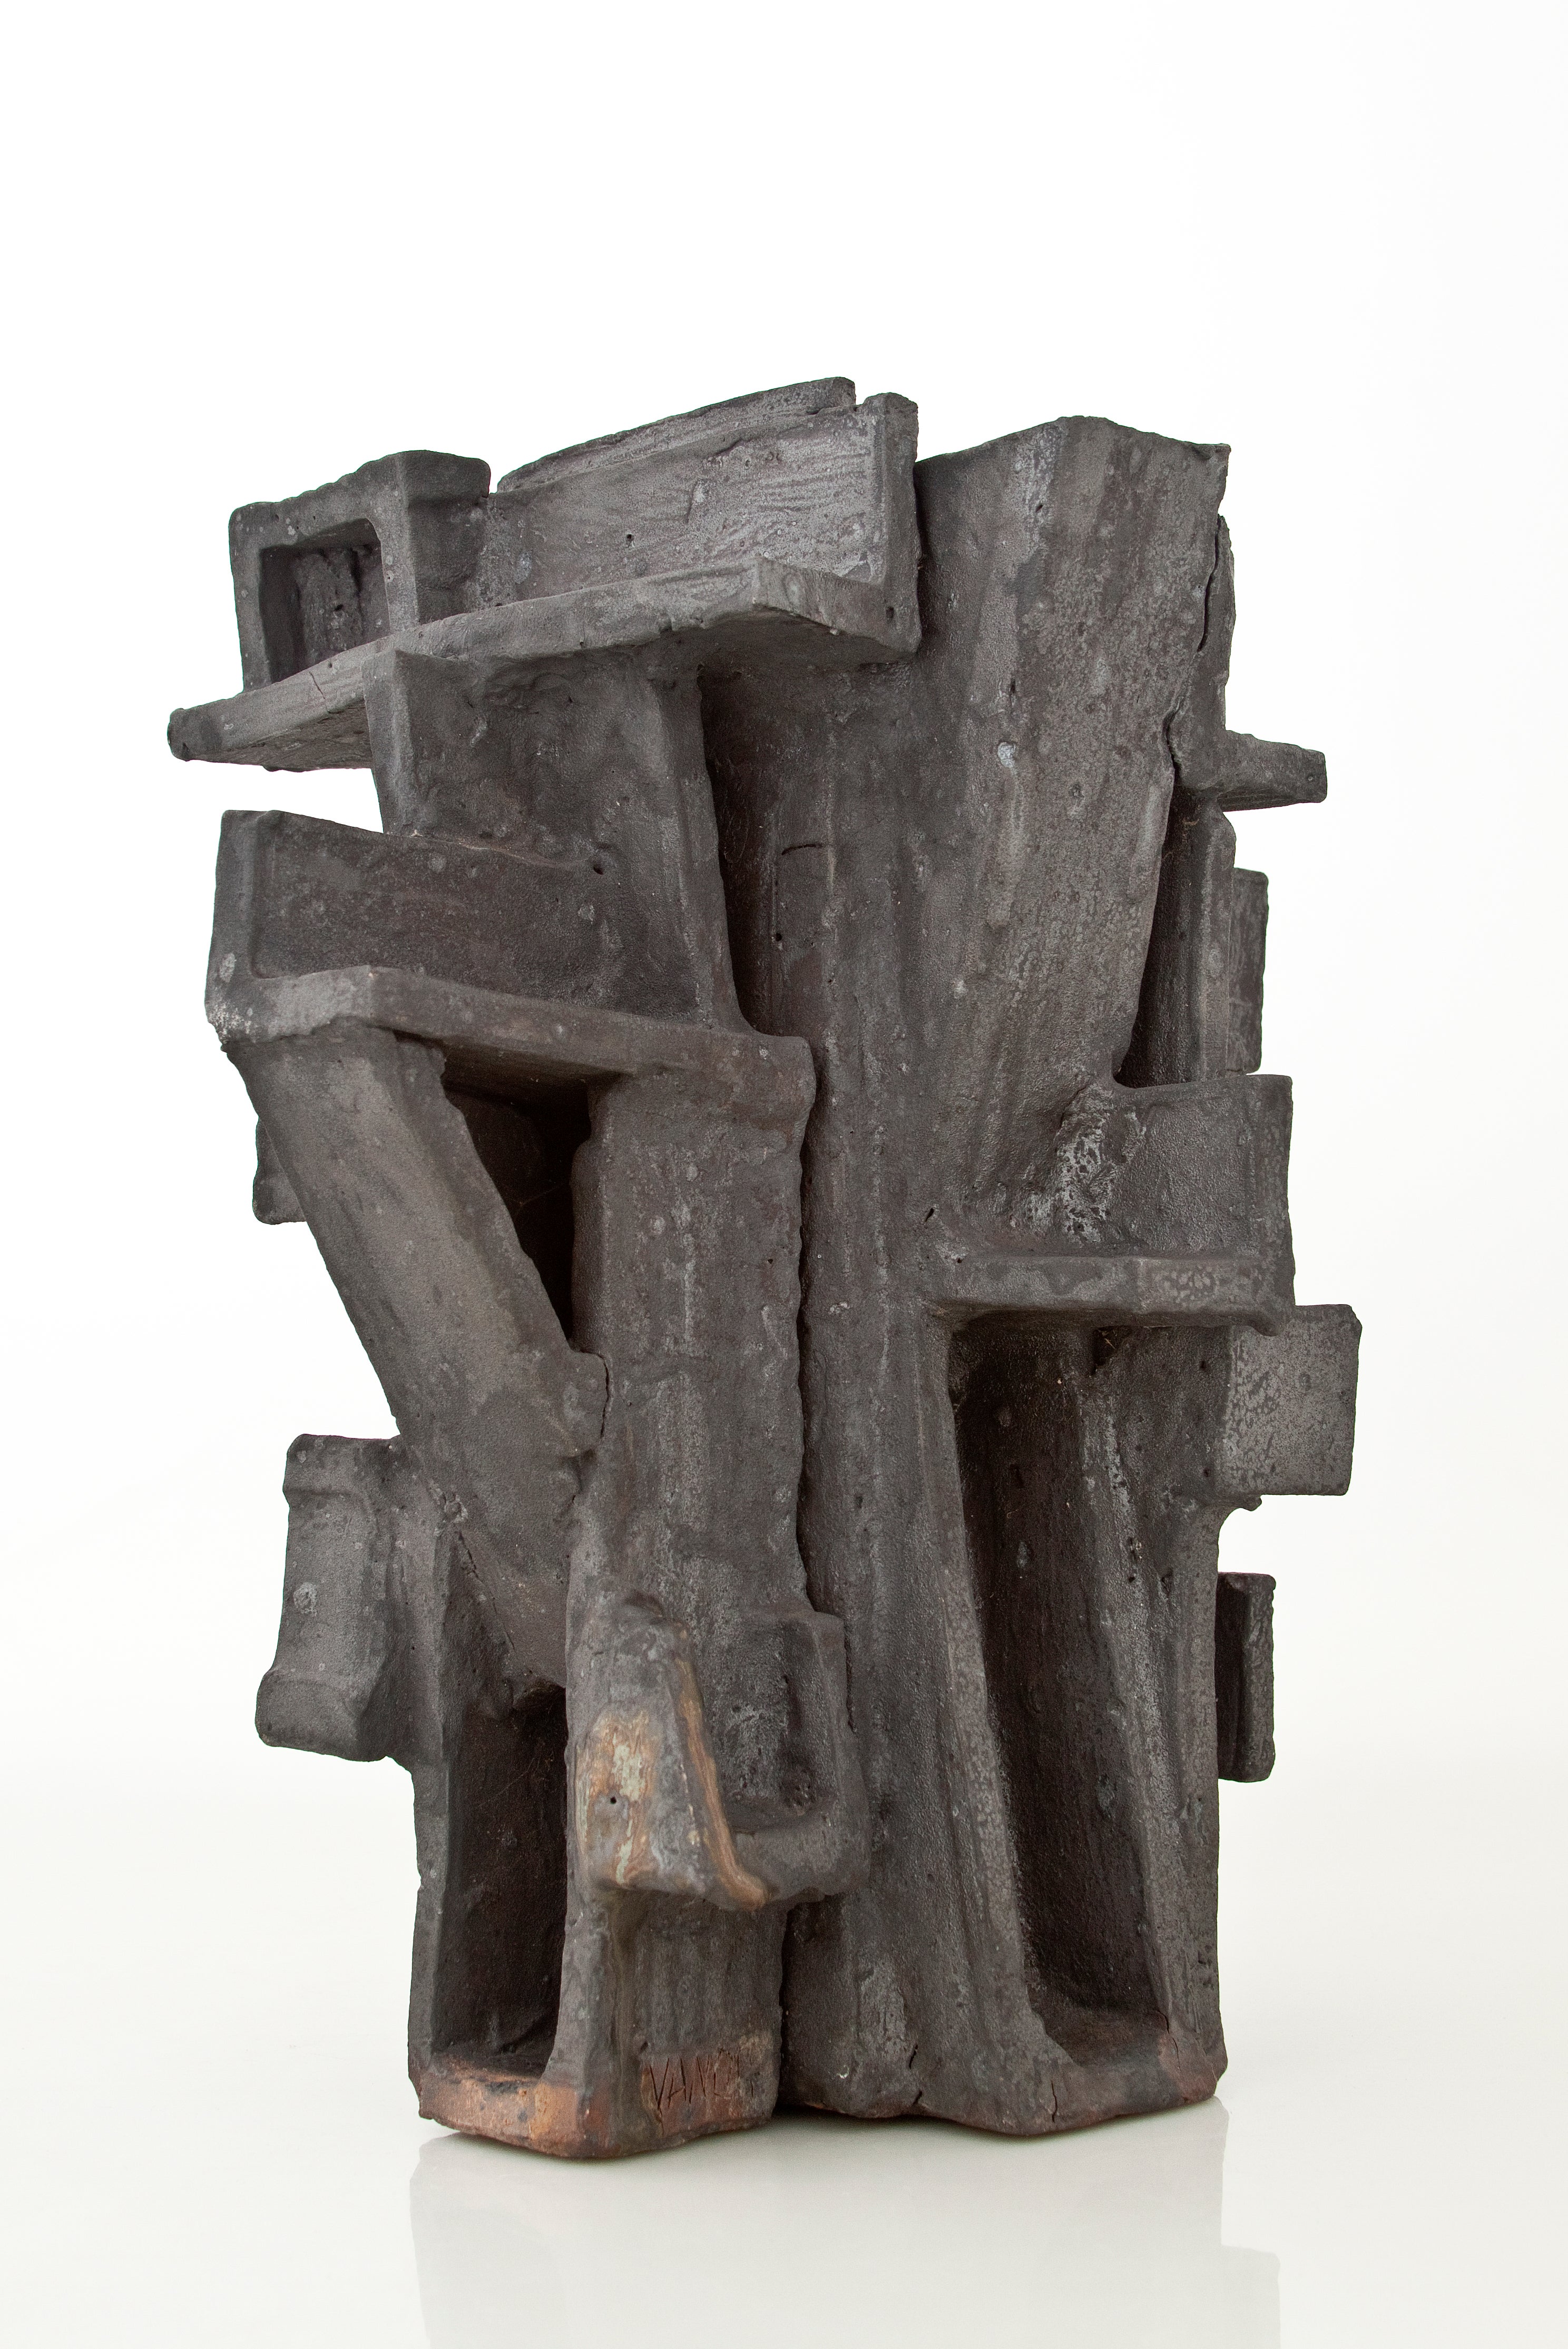 A Glazed Stoneware Abstract Sculpture by Vassil Ivanoff